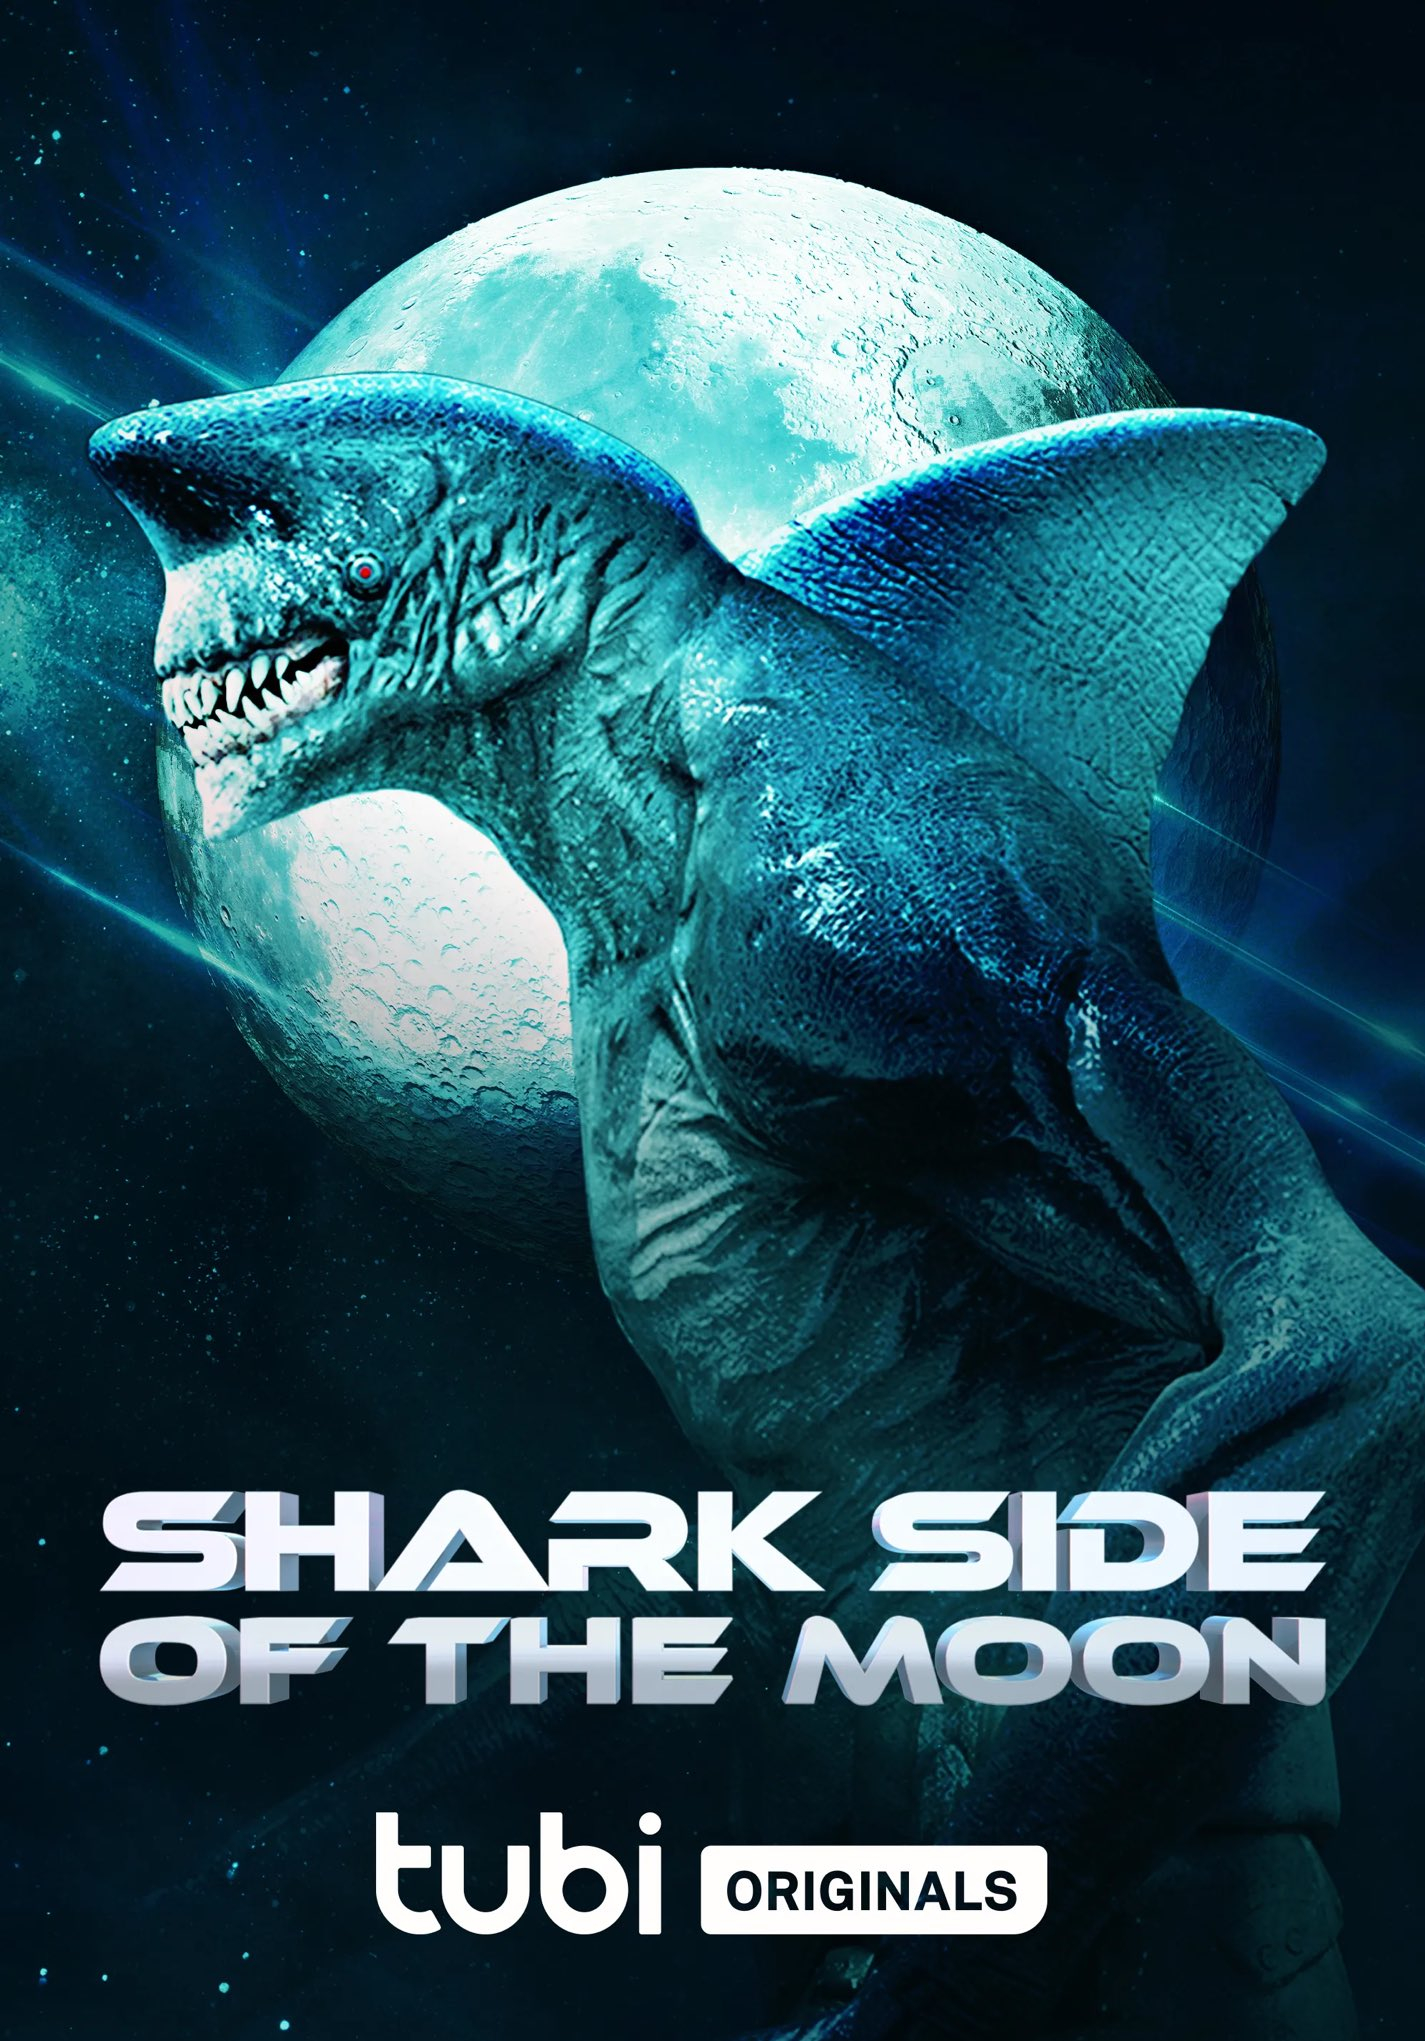 Shark Side of the Moon Trailer & Poster